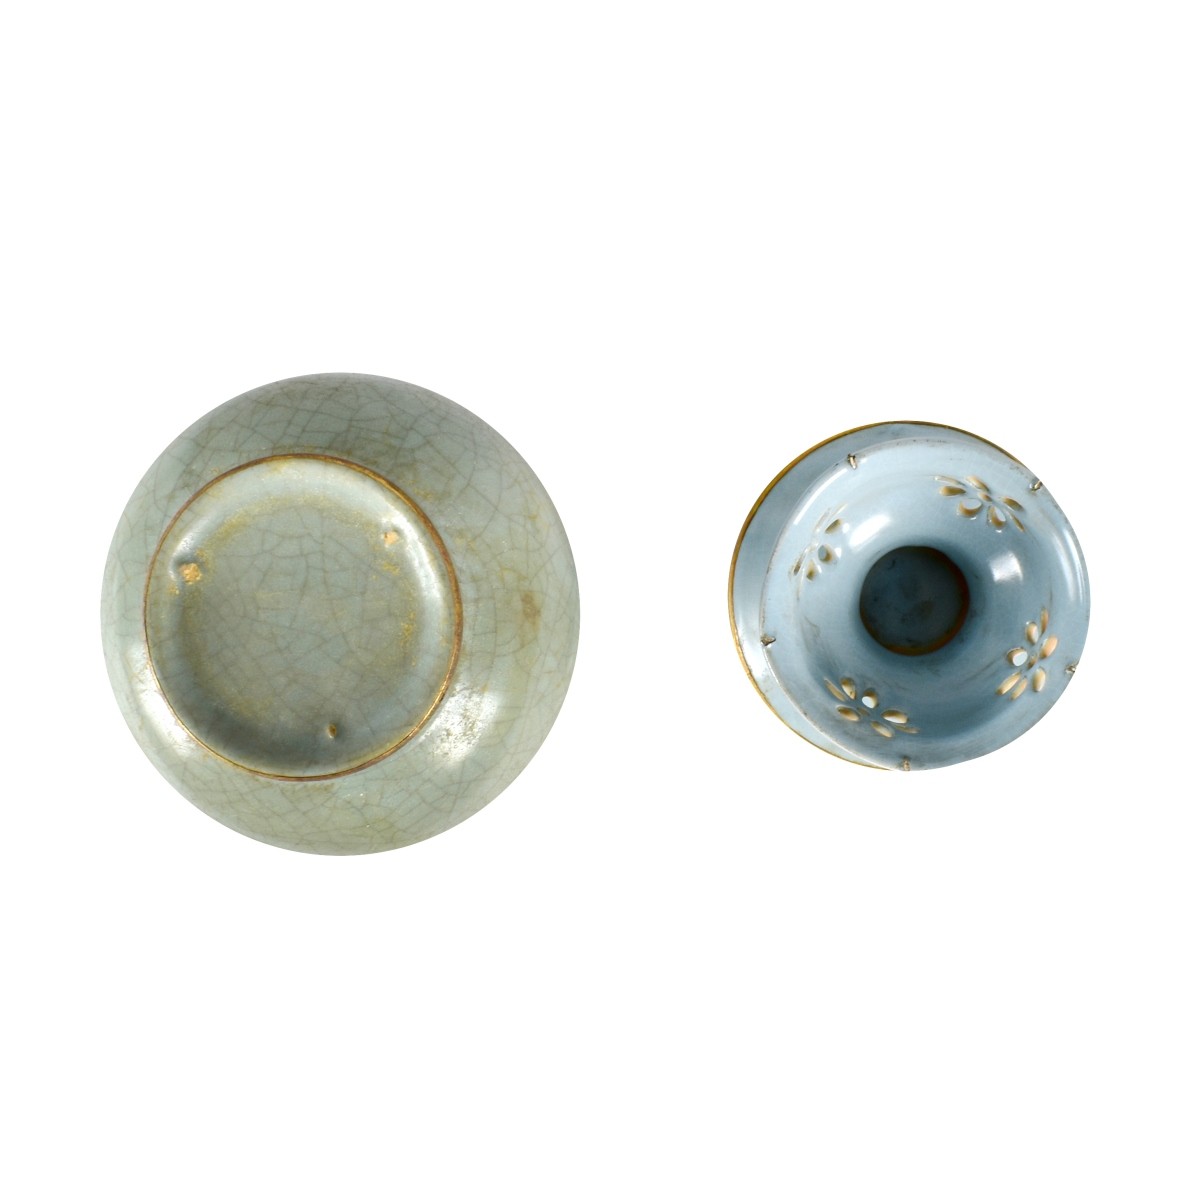 Two Chinese Porcelain Tableware